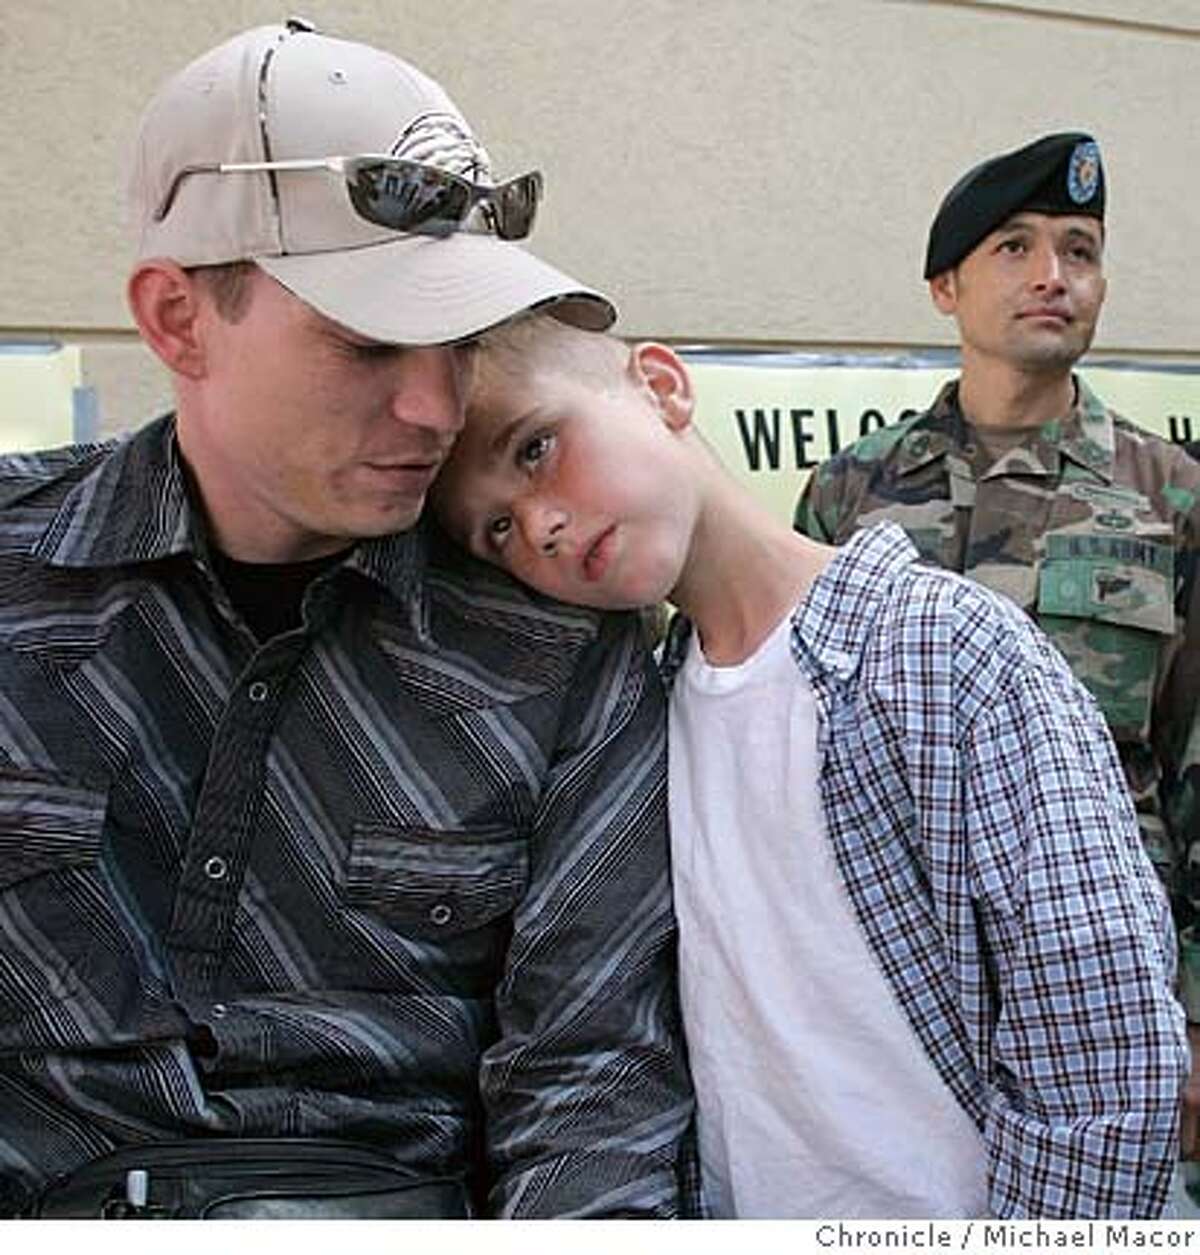 Justin Buyas, Michael's oldest son, rests his head on his dad's shoulder as he returned to his home in Eastern Washington. A heroes welcome at the local airport, included soldiers from Fort Lewis, the home base that Michael was staioned at, there to greet him upon his return. Story of American soldier Michael Buyas who lost both of his legs in an explosion while on serving in Iraq. He returns home for the first time since the incident took place last December, to his home town of Chelan, Washington, after spending the last 6 months at Walter Reed Hospital, recovering from his injuries, in Washington DC. 5/22/05 Chelan, Wa Michael Macor / San Francisco Chronicle